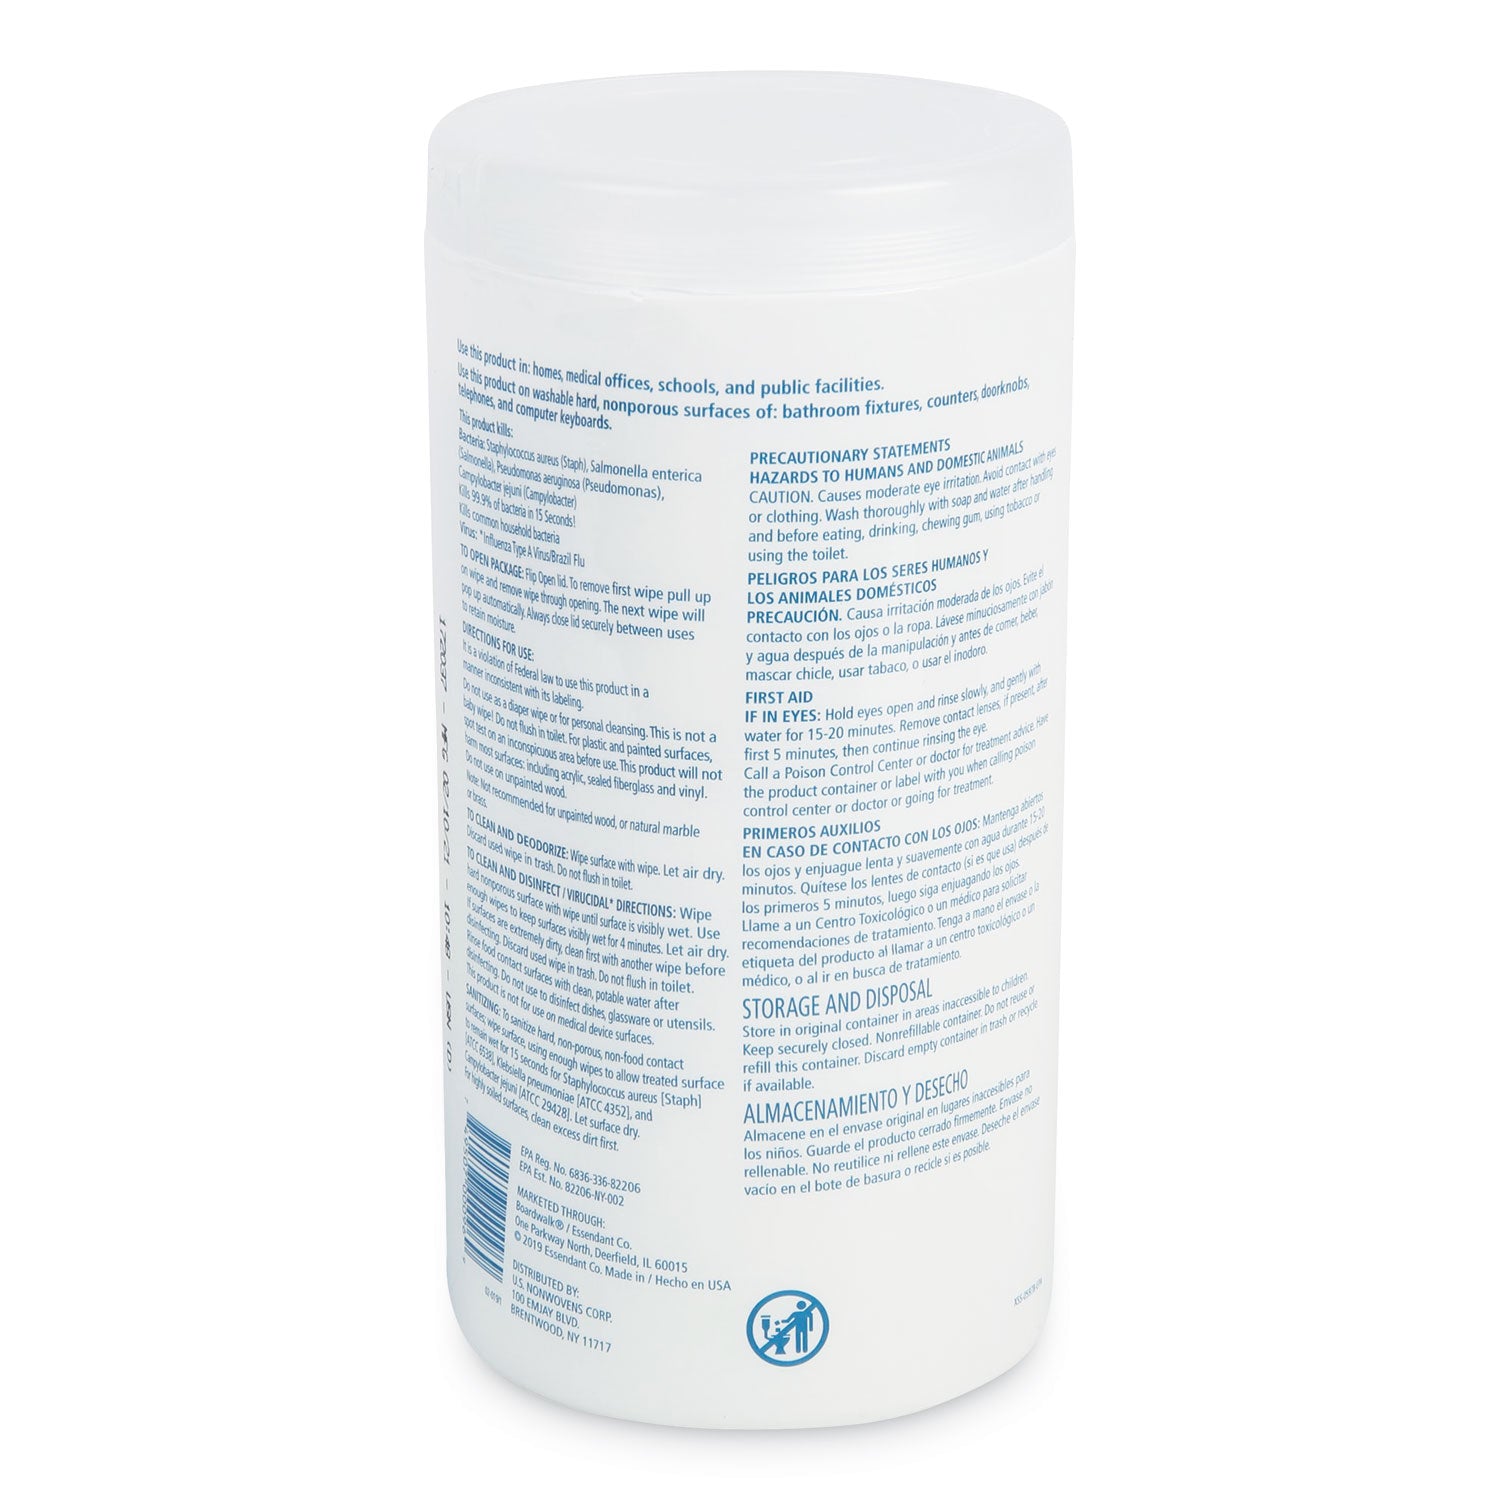 disinfecting-wipes-7-x-8-lemon-scent-75-canister-12-canisters-carton_bwk455w753ct - 3